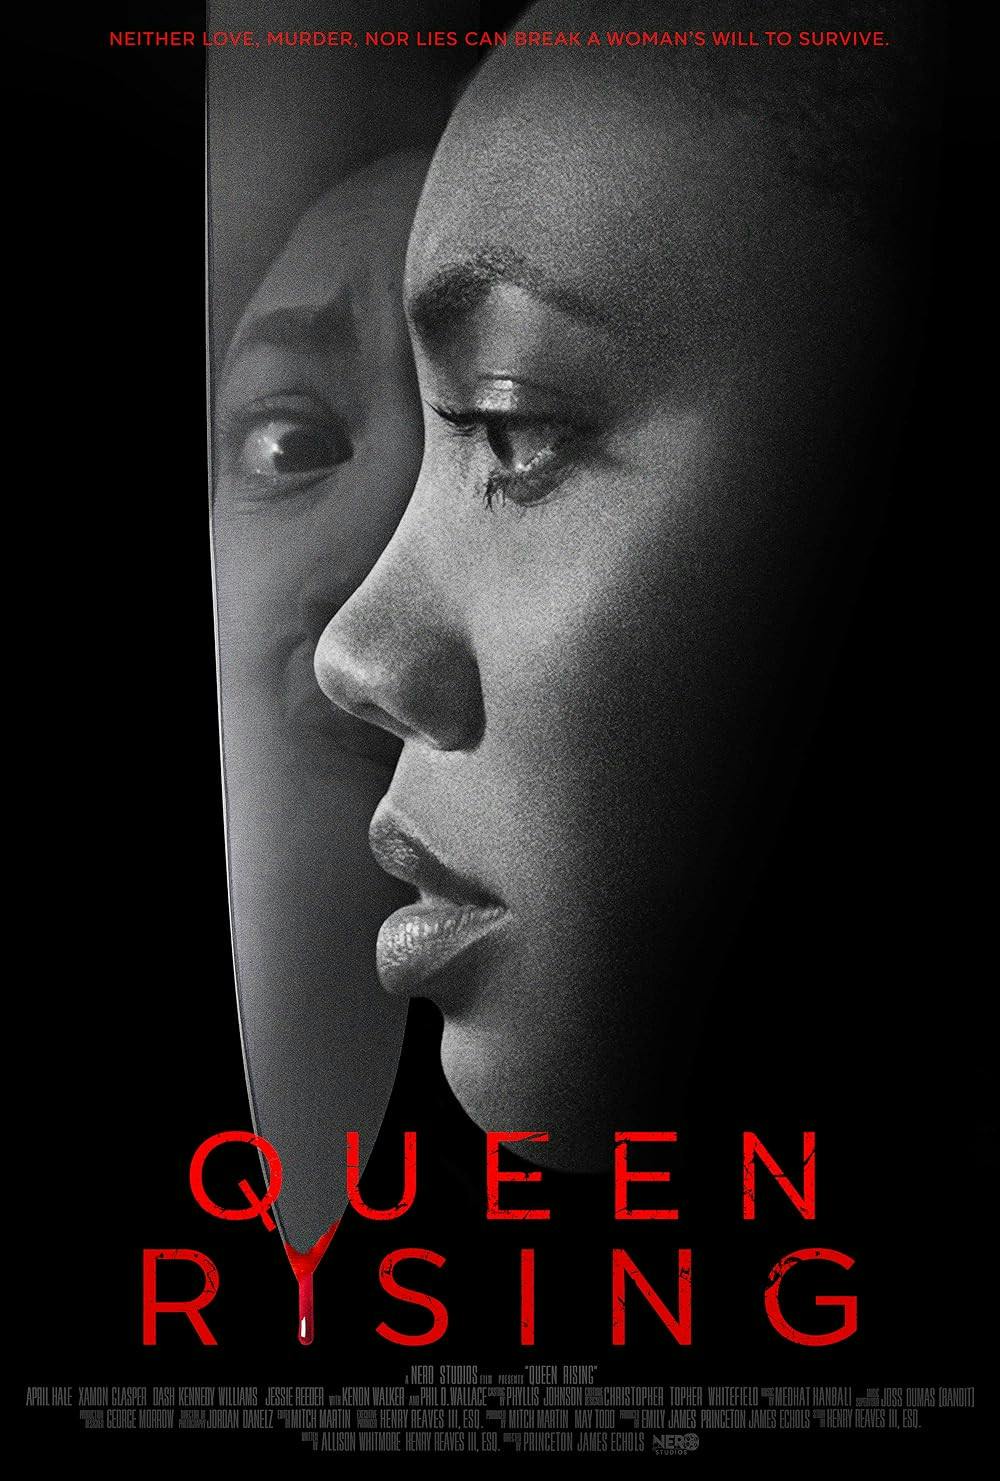 Review: 'Queen Rising' is a shocking thriller